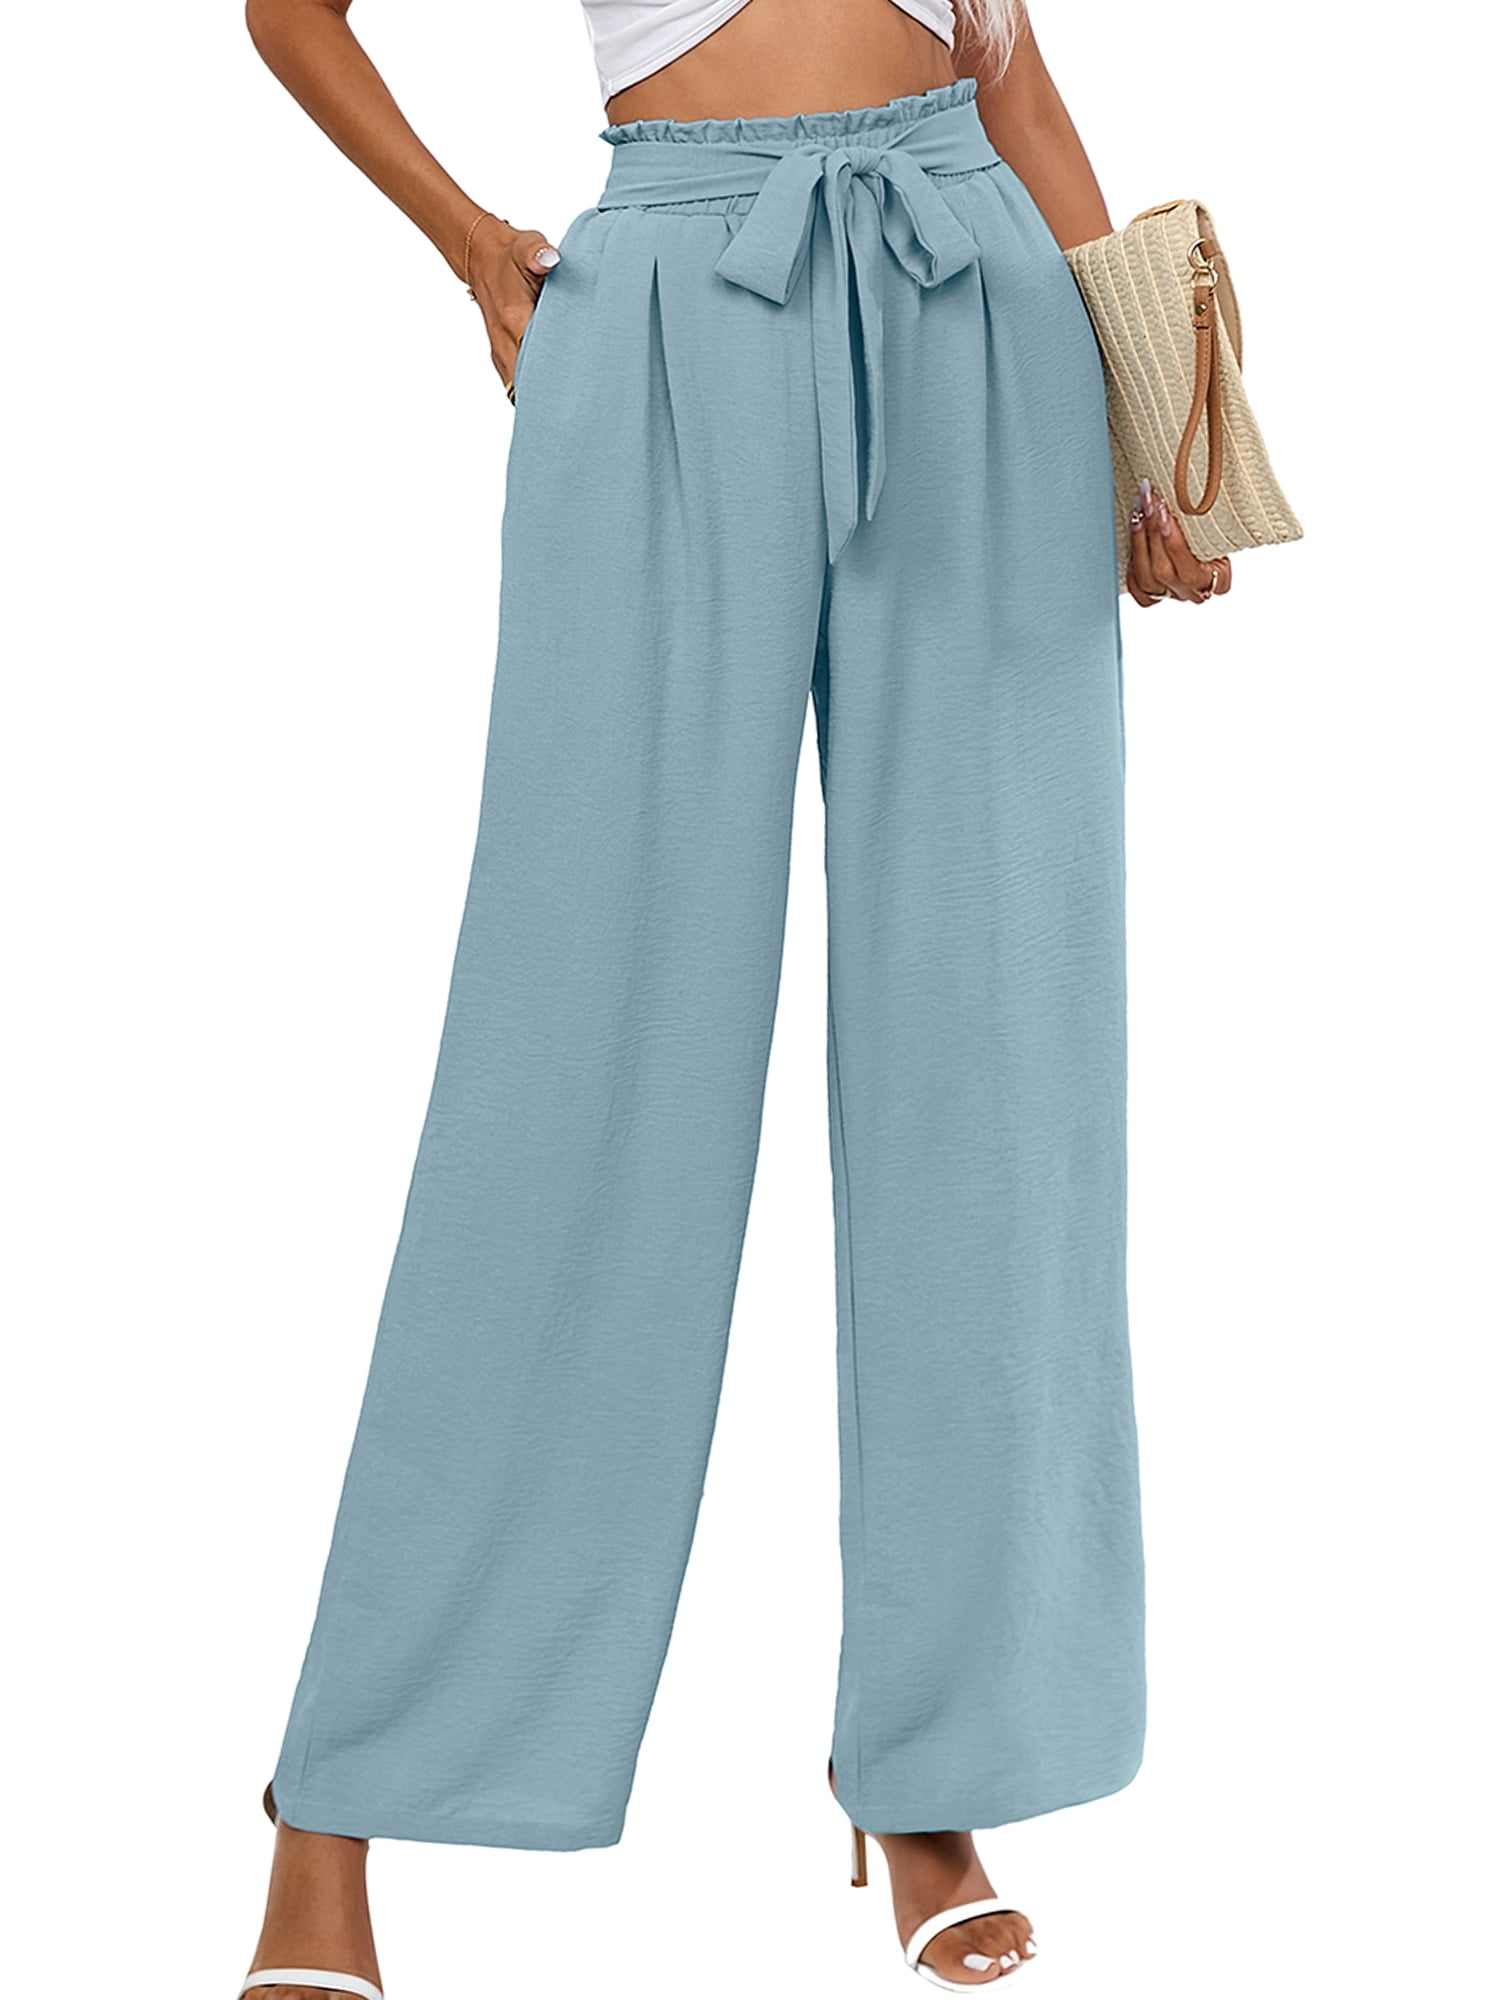 Chiclily Belted Wide Leg Pants for Women High Waisted Business Casual  Palazzo Pants Work Trousers Loose Flowy Summer Beach Lounge Pants with  Pockets, US Size Small in Blue Gray 